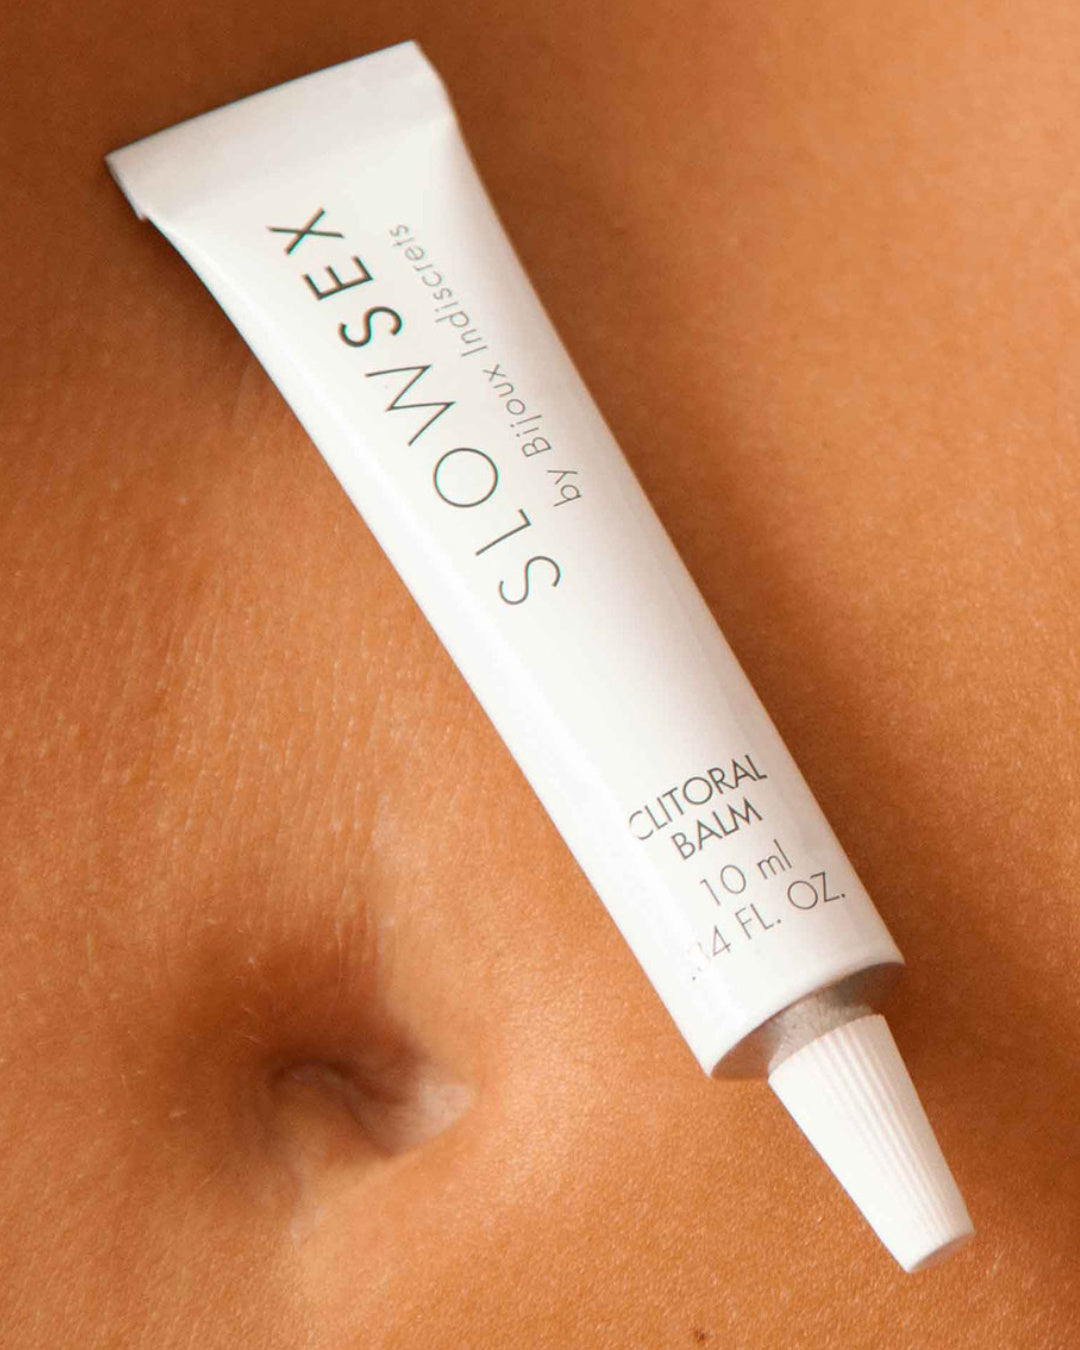 Bijoux Indiscrets Slow Sex Clitoral Balm tube on mode's stomach